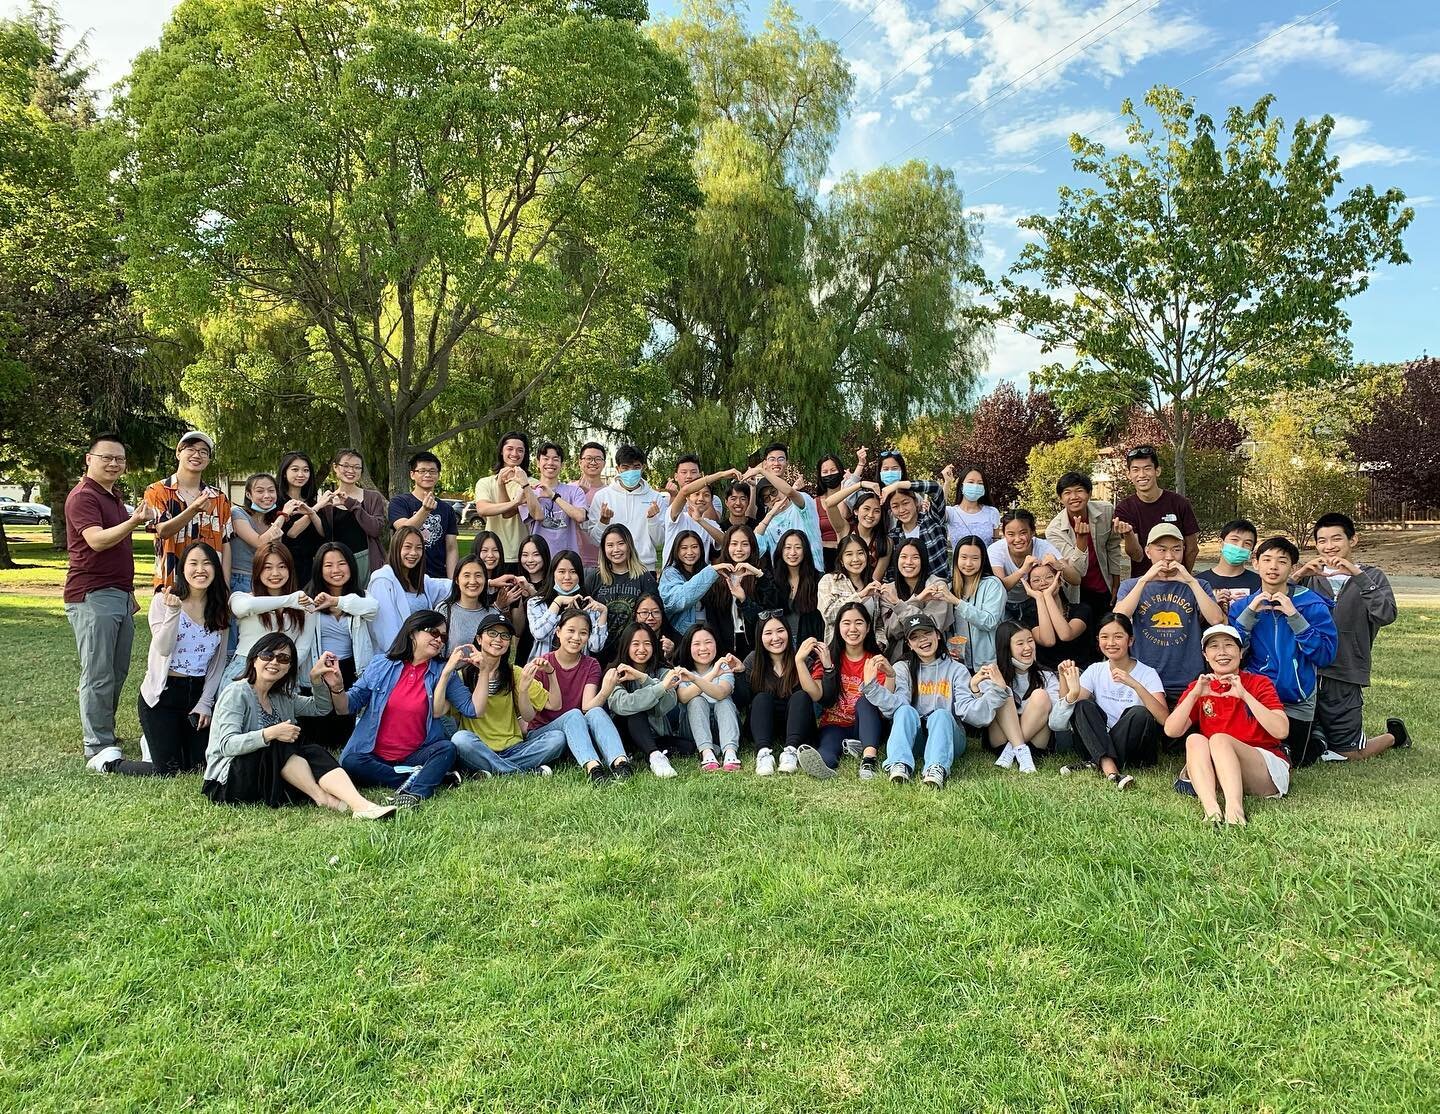 And that&rsquo;s a wrap for our Grand Reunion Picnic! 🎈From our first groups of volunteers to our newest one yet, we had the best time seeing you all again yesterday! ❤️ We hope you had a good time too and were able to destress and relax with your C